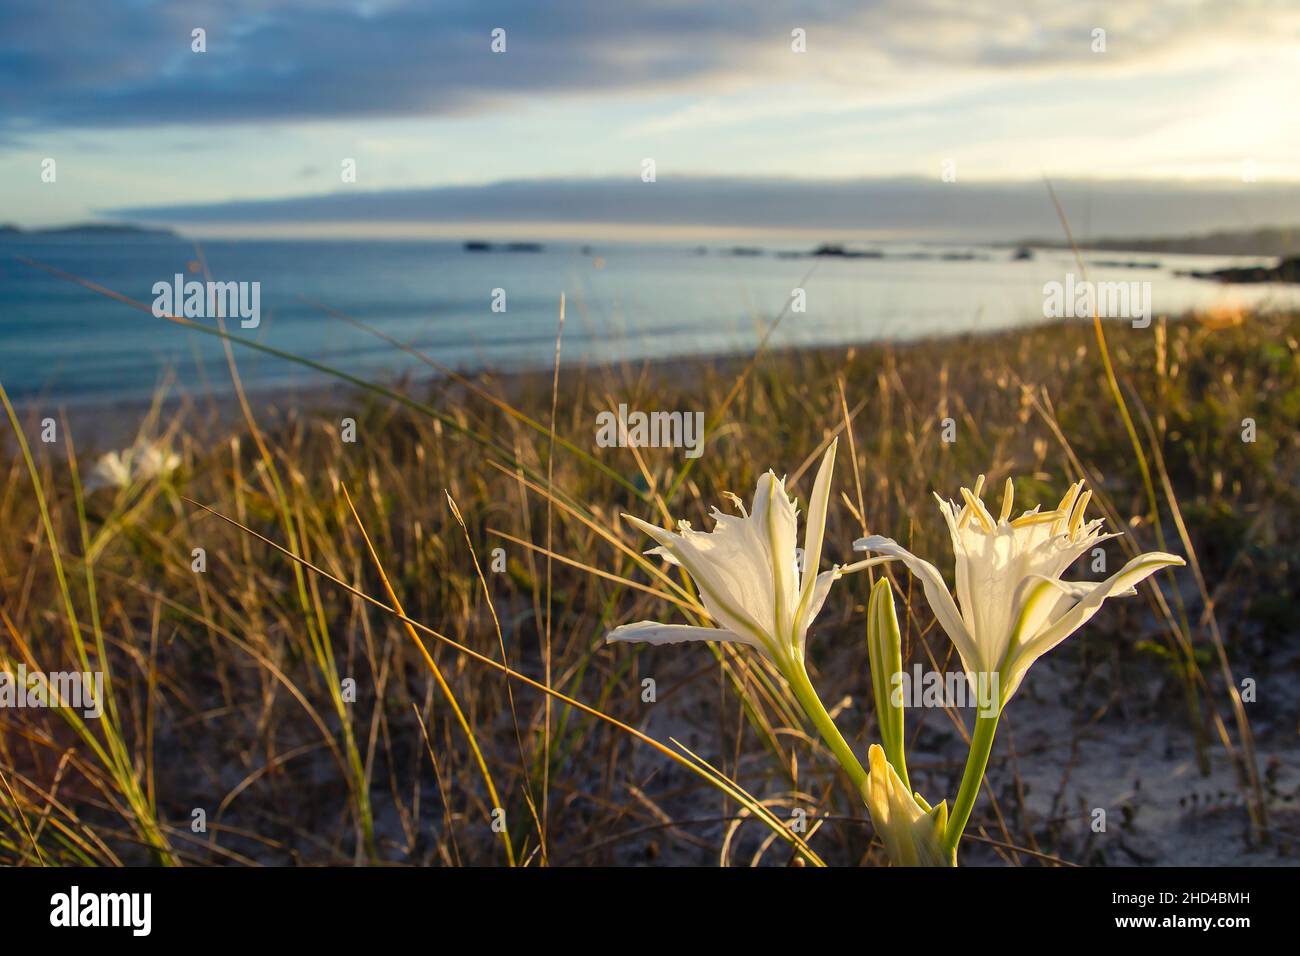 Pancratium maritimum or sea daffodil white flowers growing wild in the coastal sand dunes, a plant in risk of extinction. Stock Photo